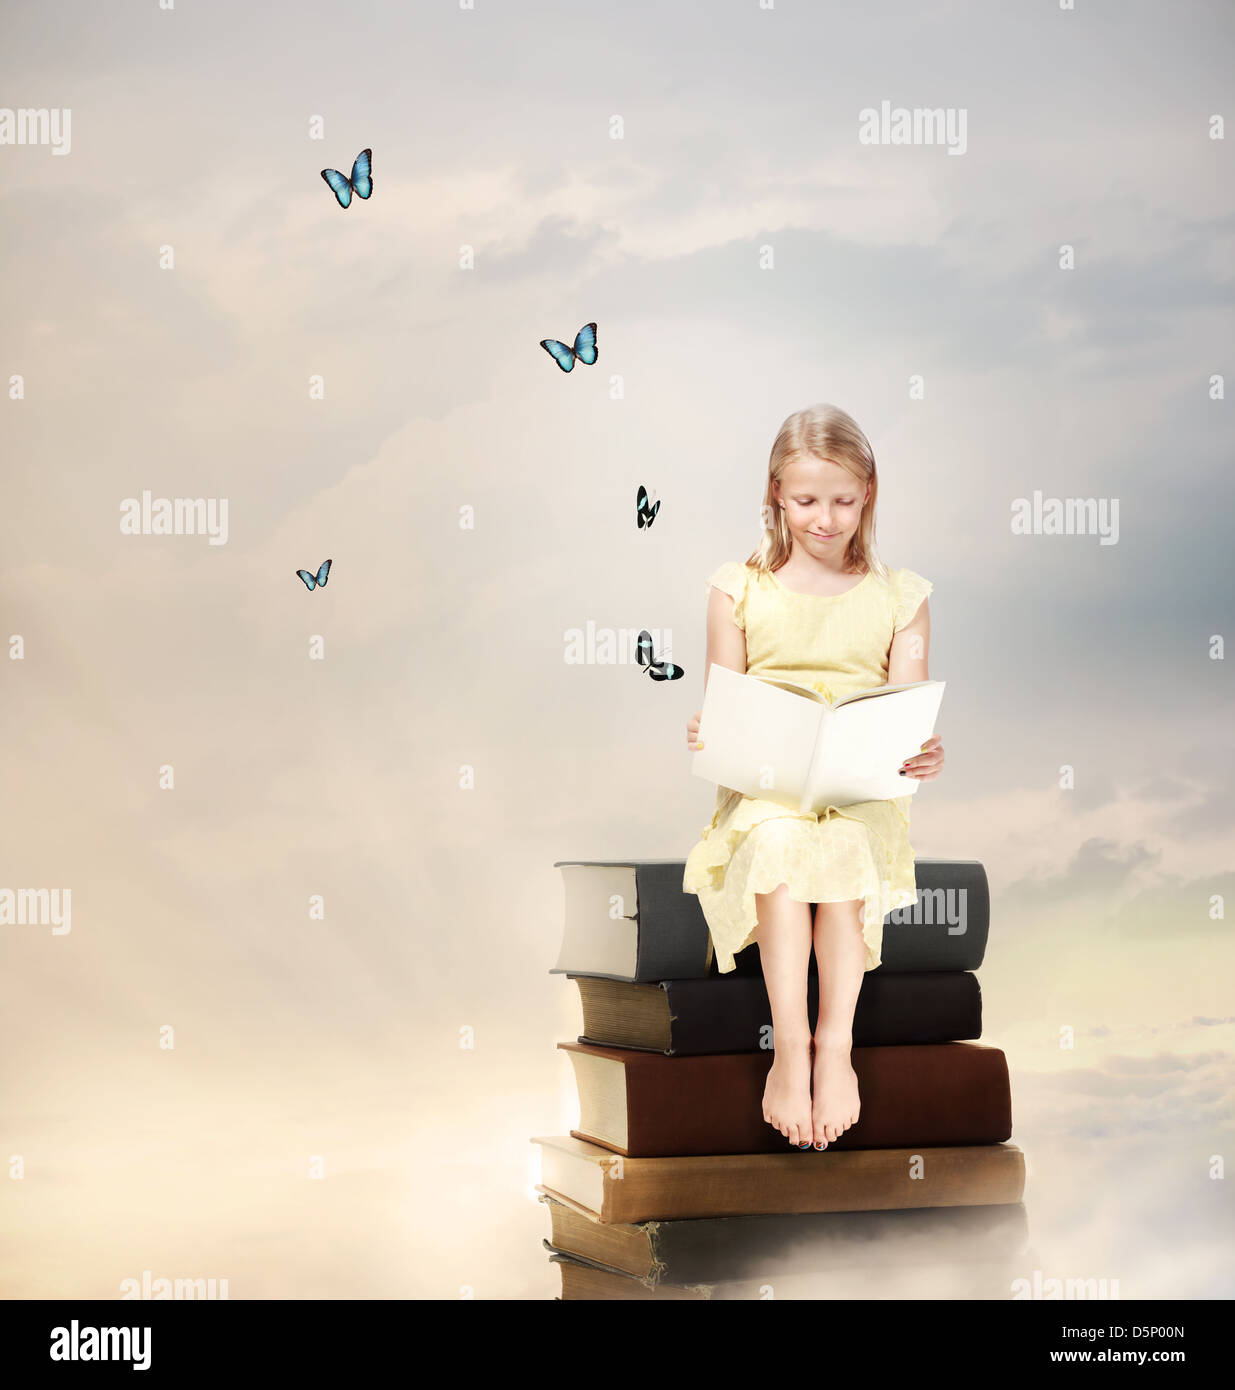 Little Blonde Girl Reading a Book on Top of Books Stock Photo